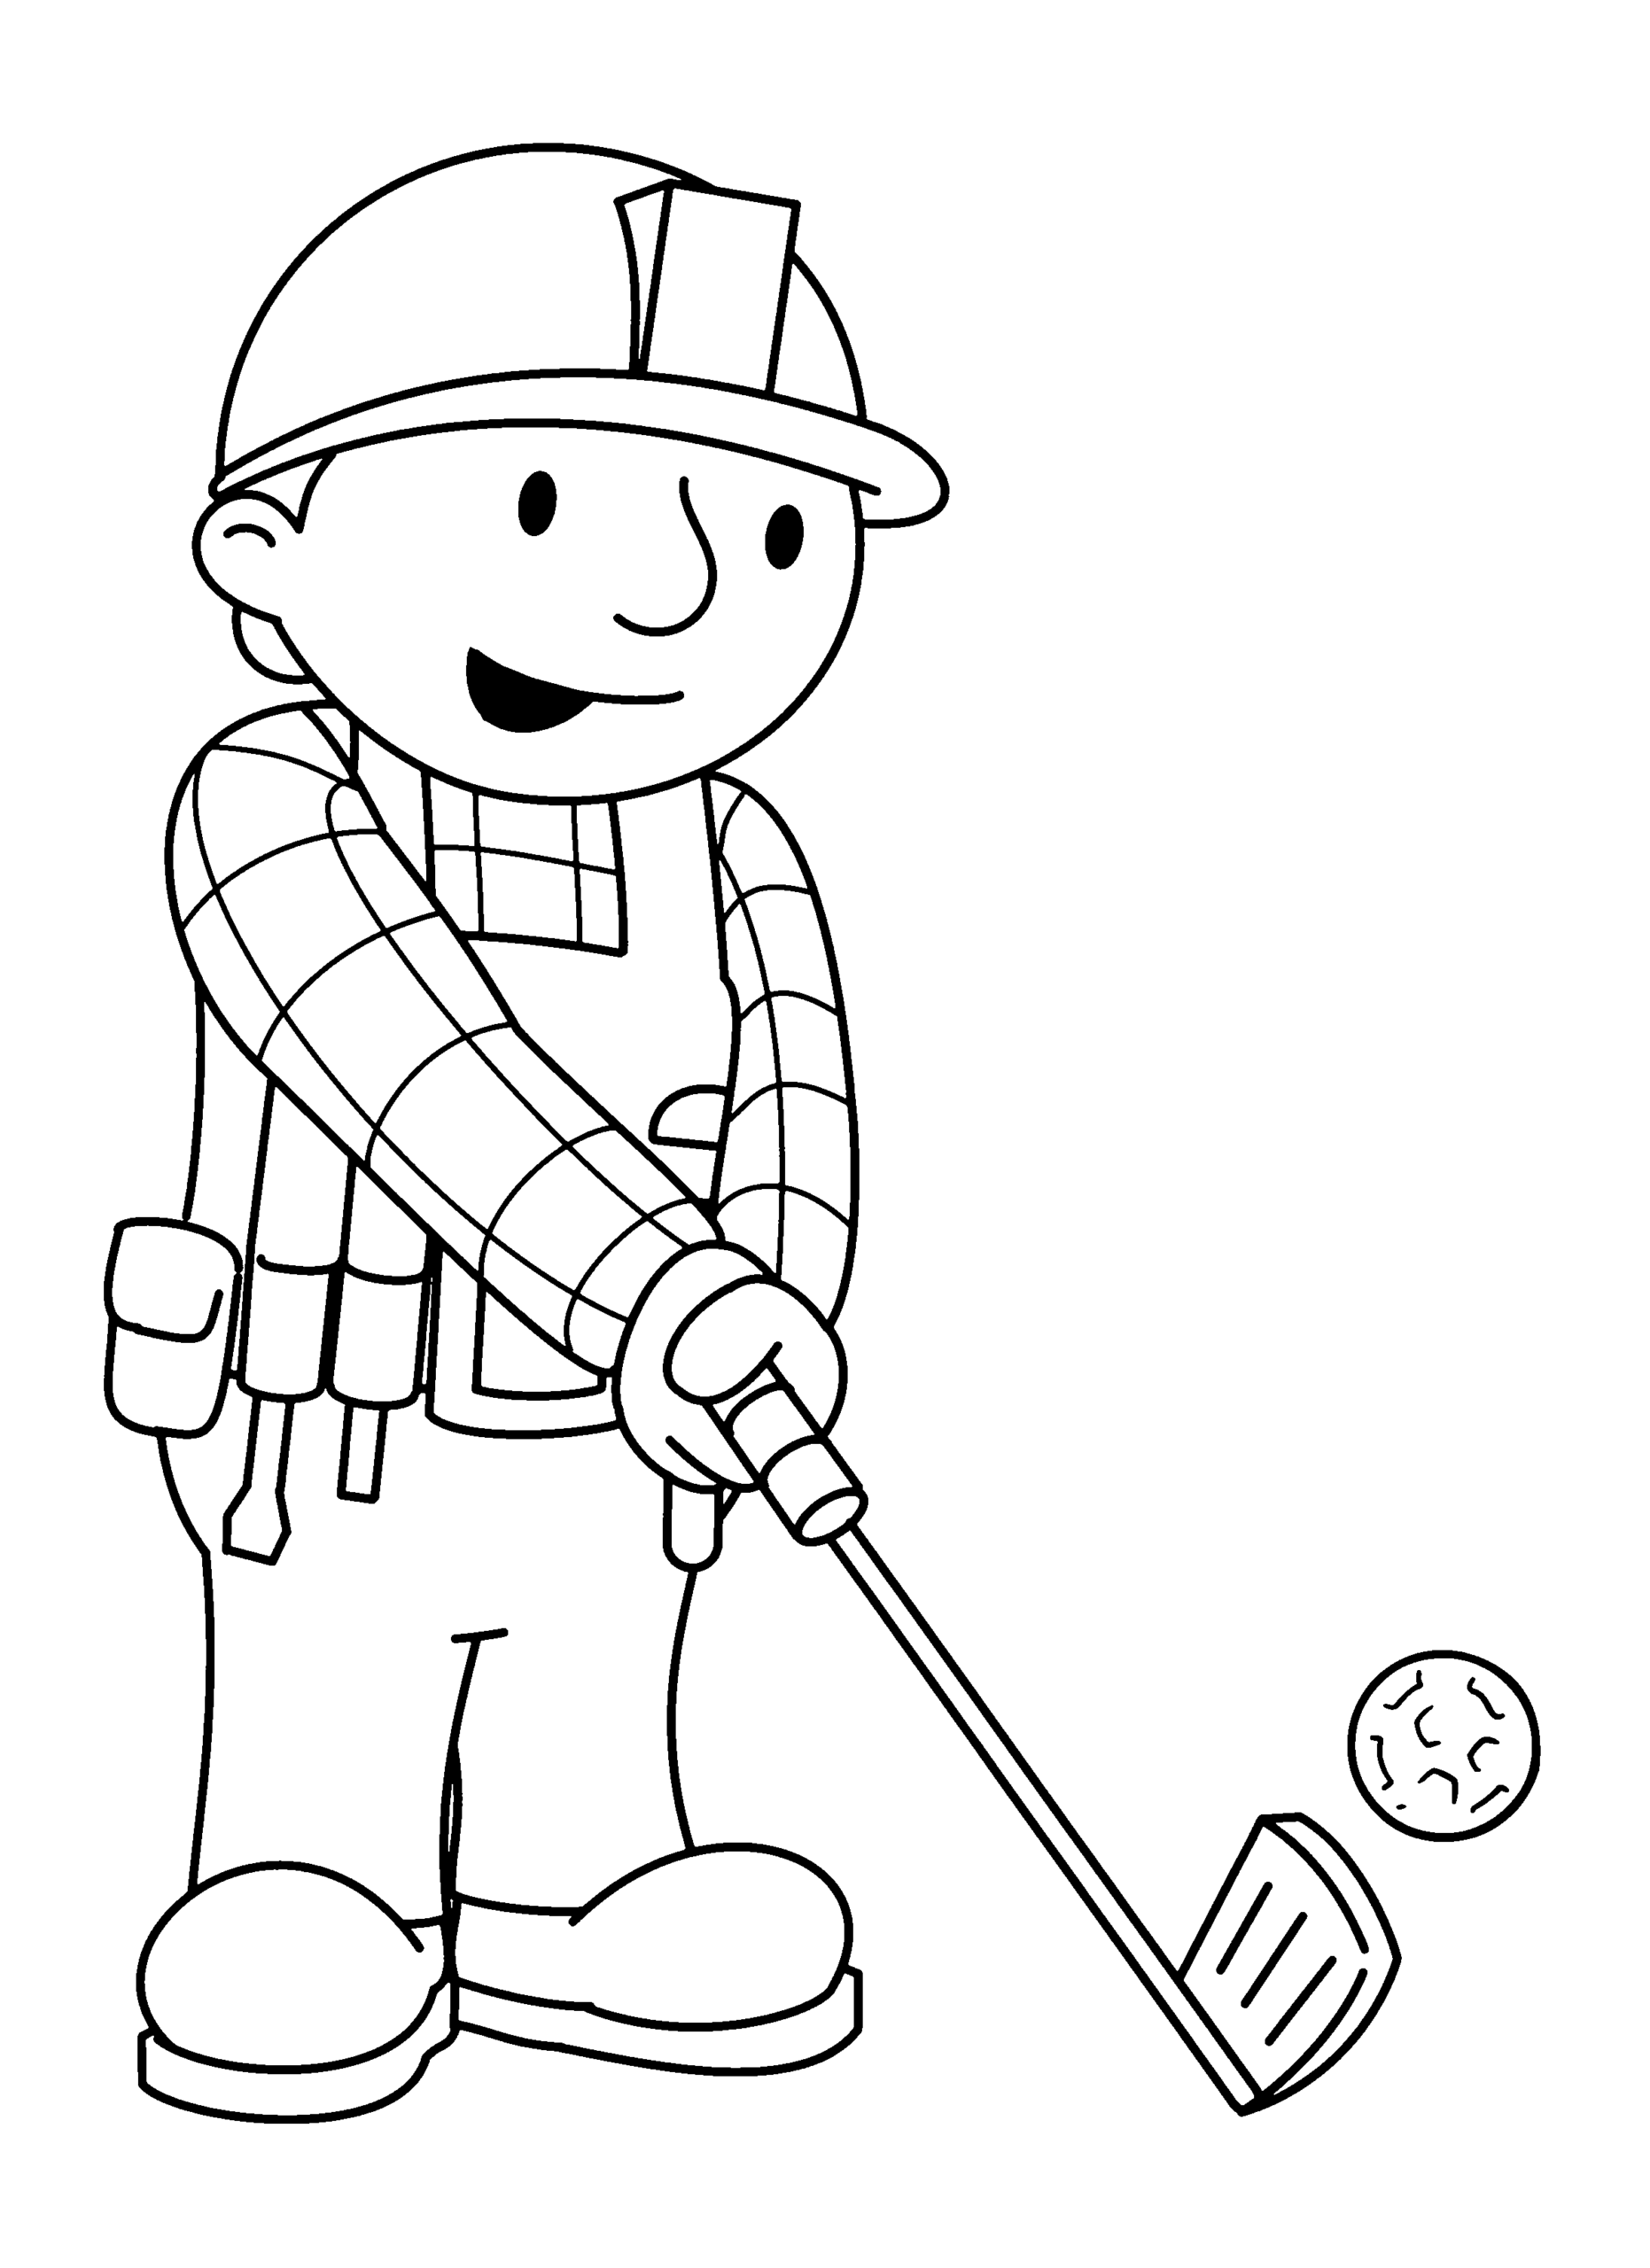 Bob the Builder Coloring Pages TV Film bob the builder 9 Printable 2020 01106 Coloring4free